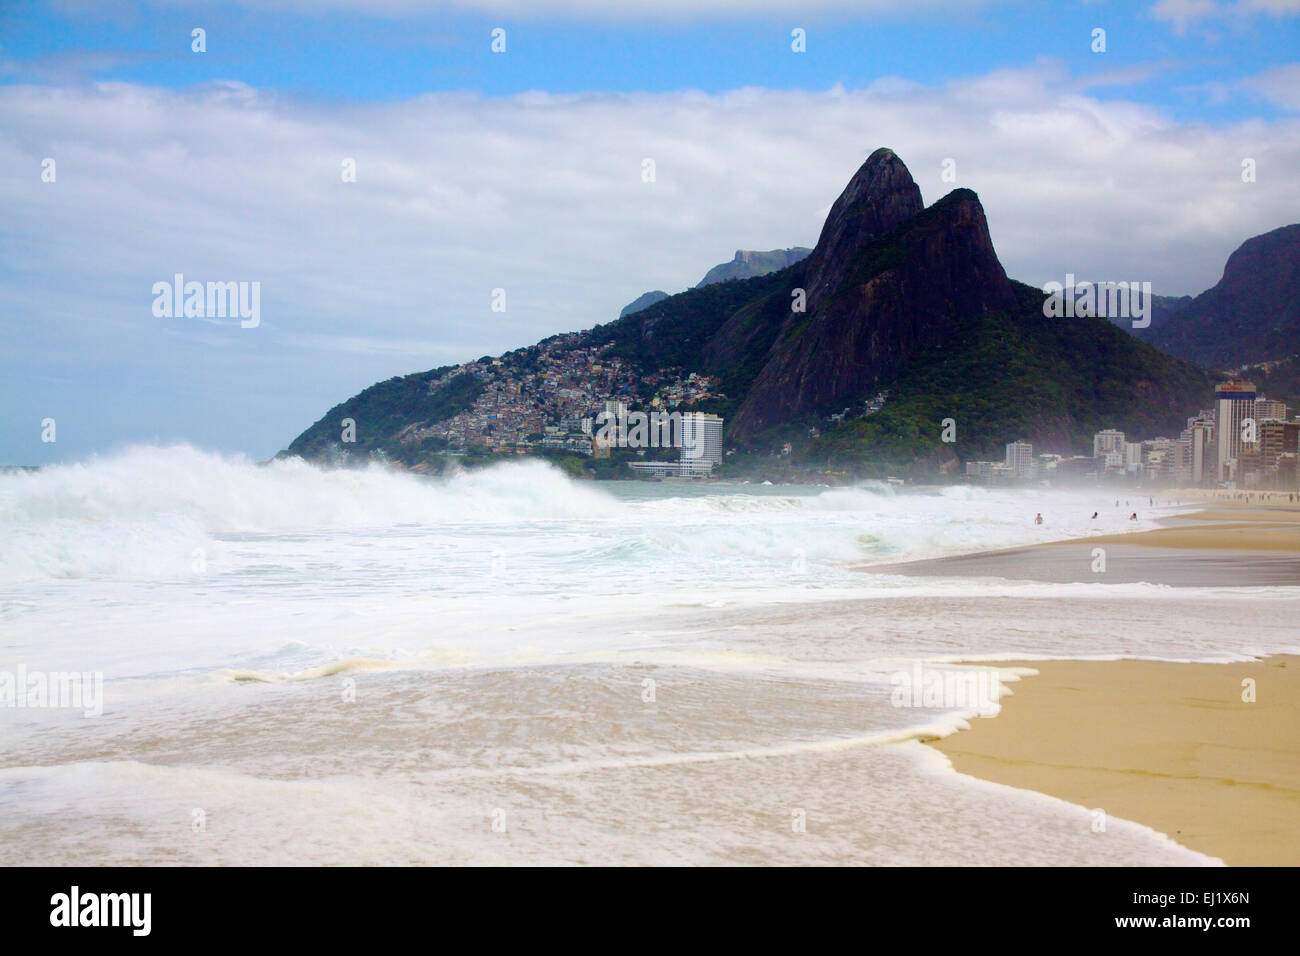 Surfing the waves at Ipanema beach Rio de Janeiro backed by mountains Stock Photo